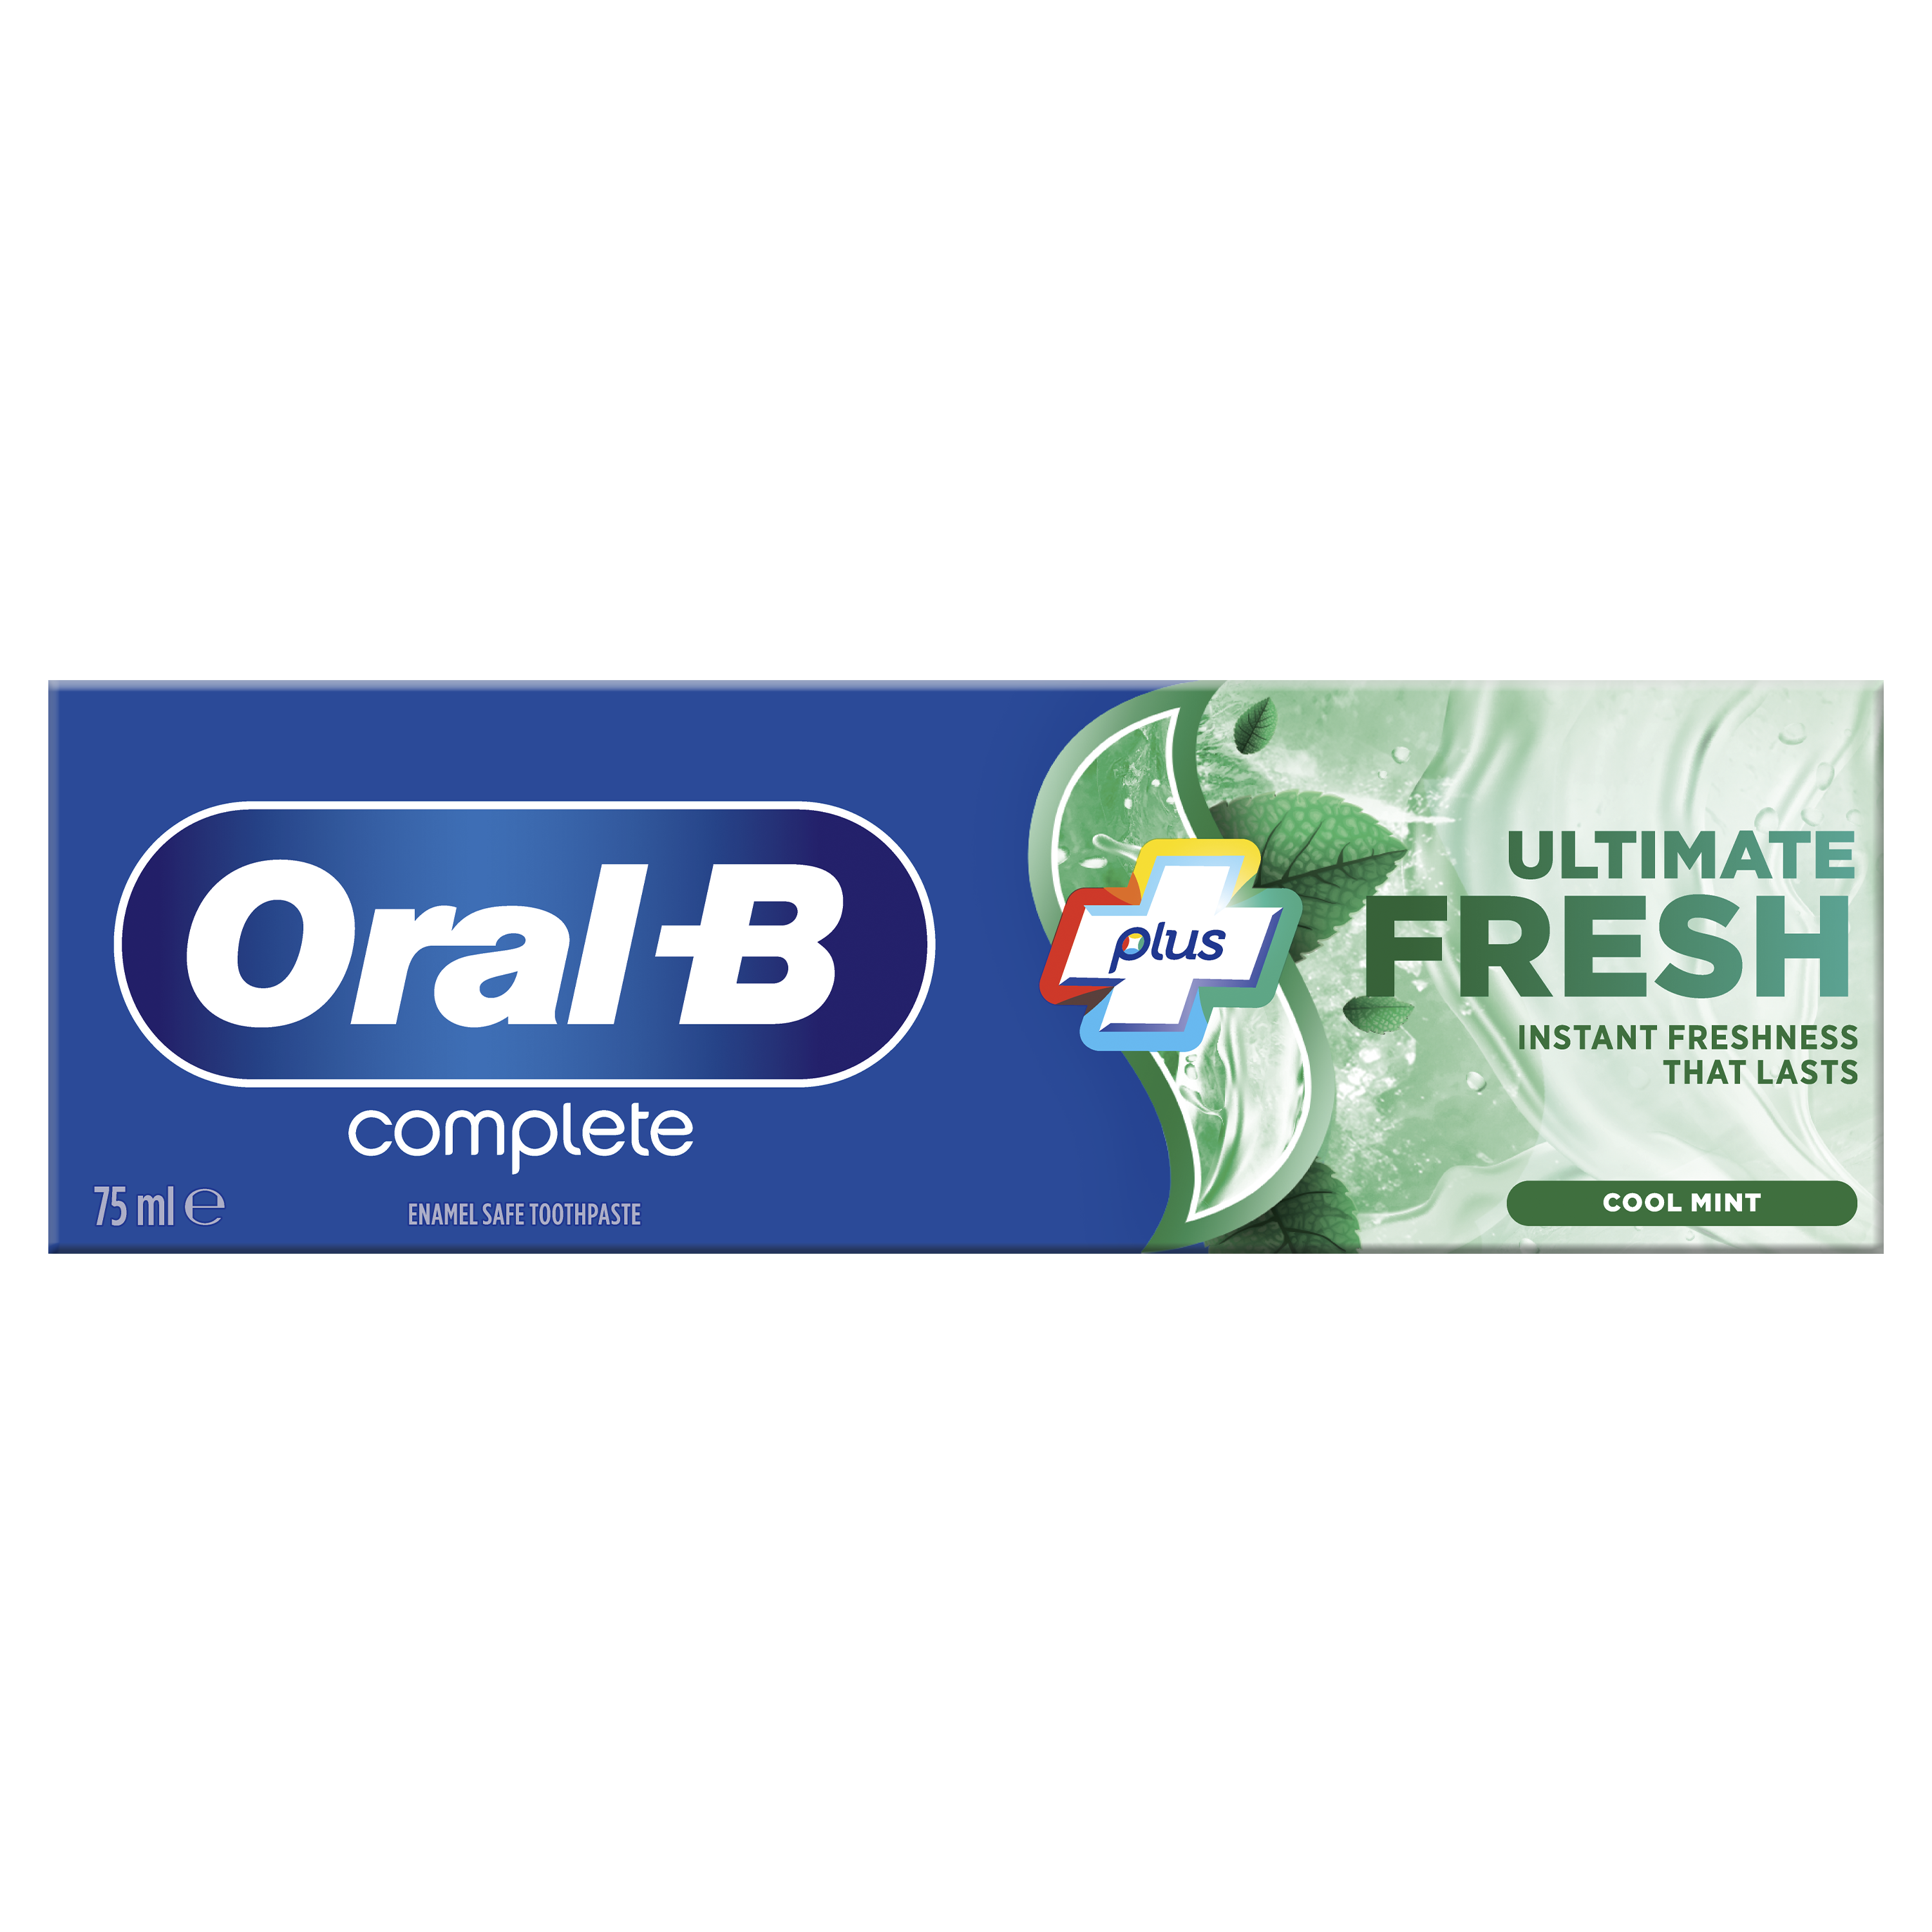 Oral-B Complete Ultimate Fresh tandpasta undefined